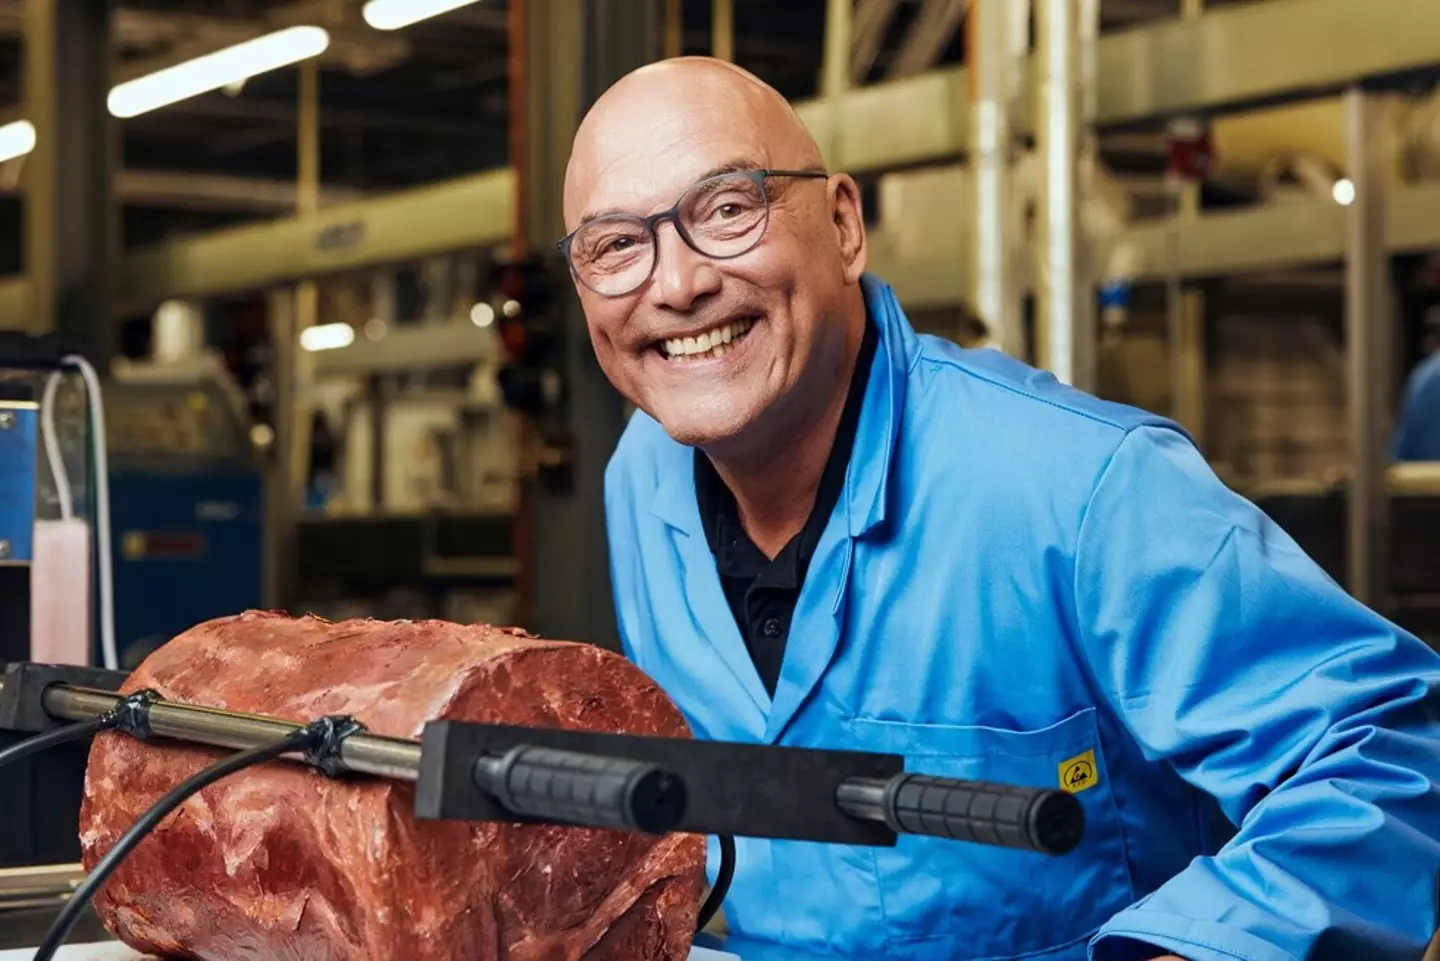 Gregg Wallace pictured with some 'human meat' which was obviously (to most) not actually from humans.